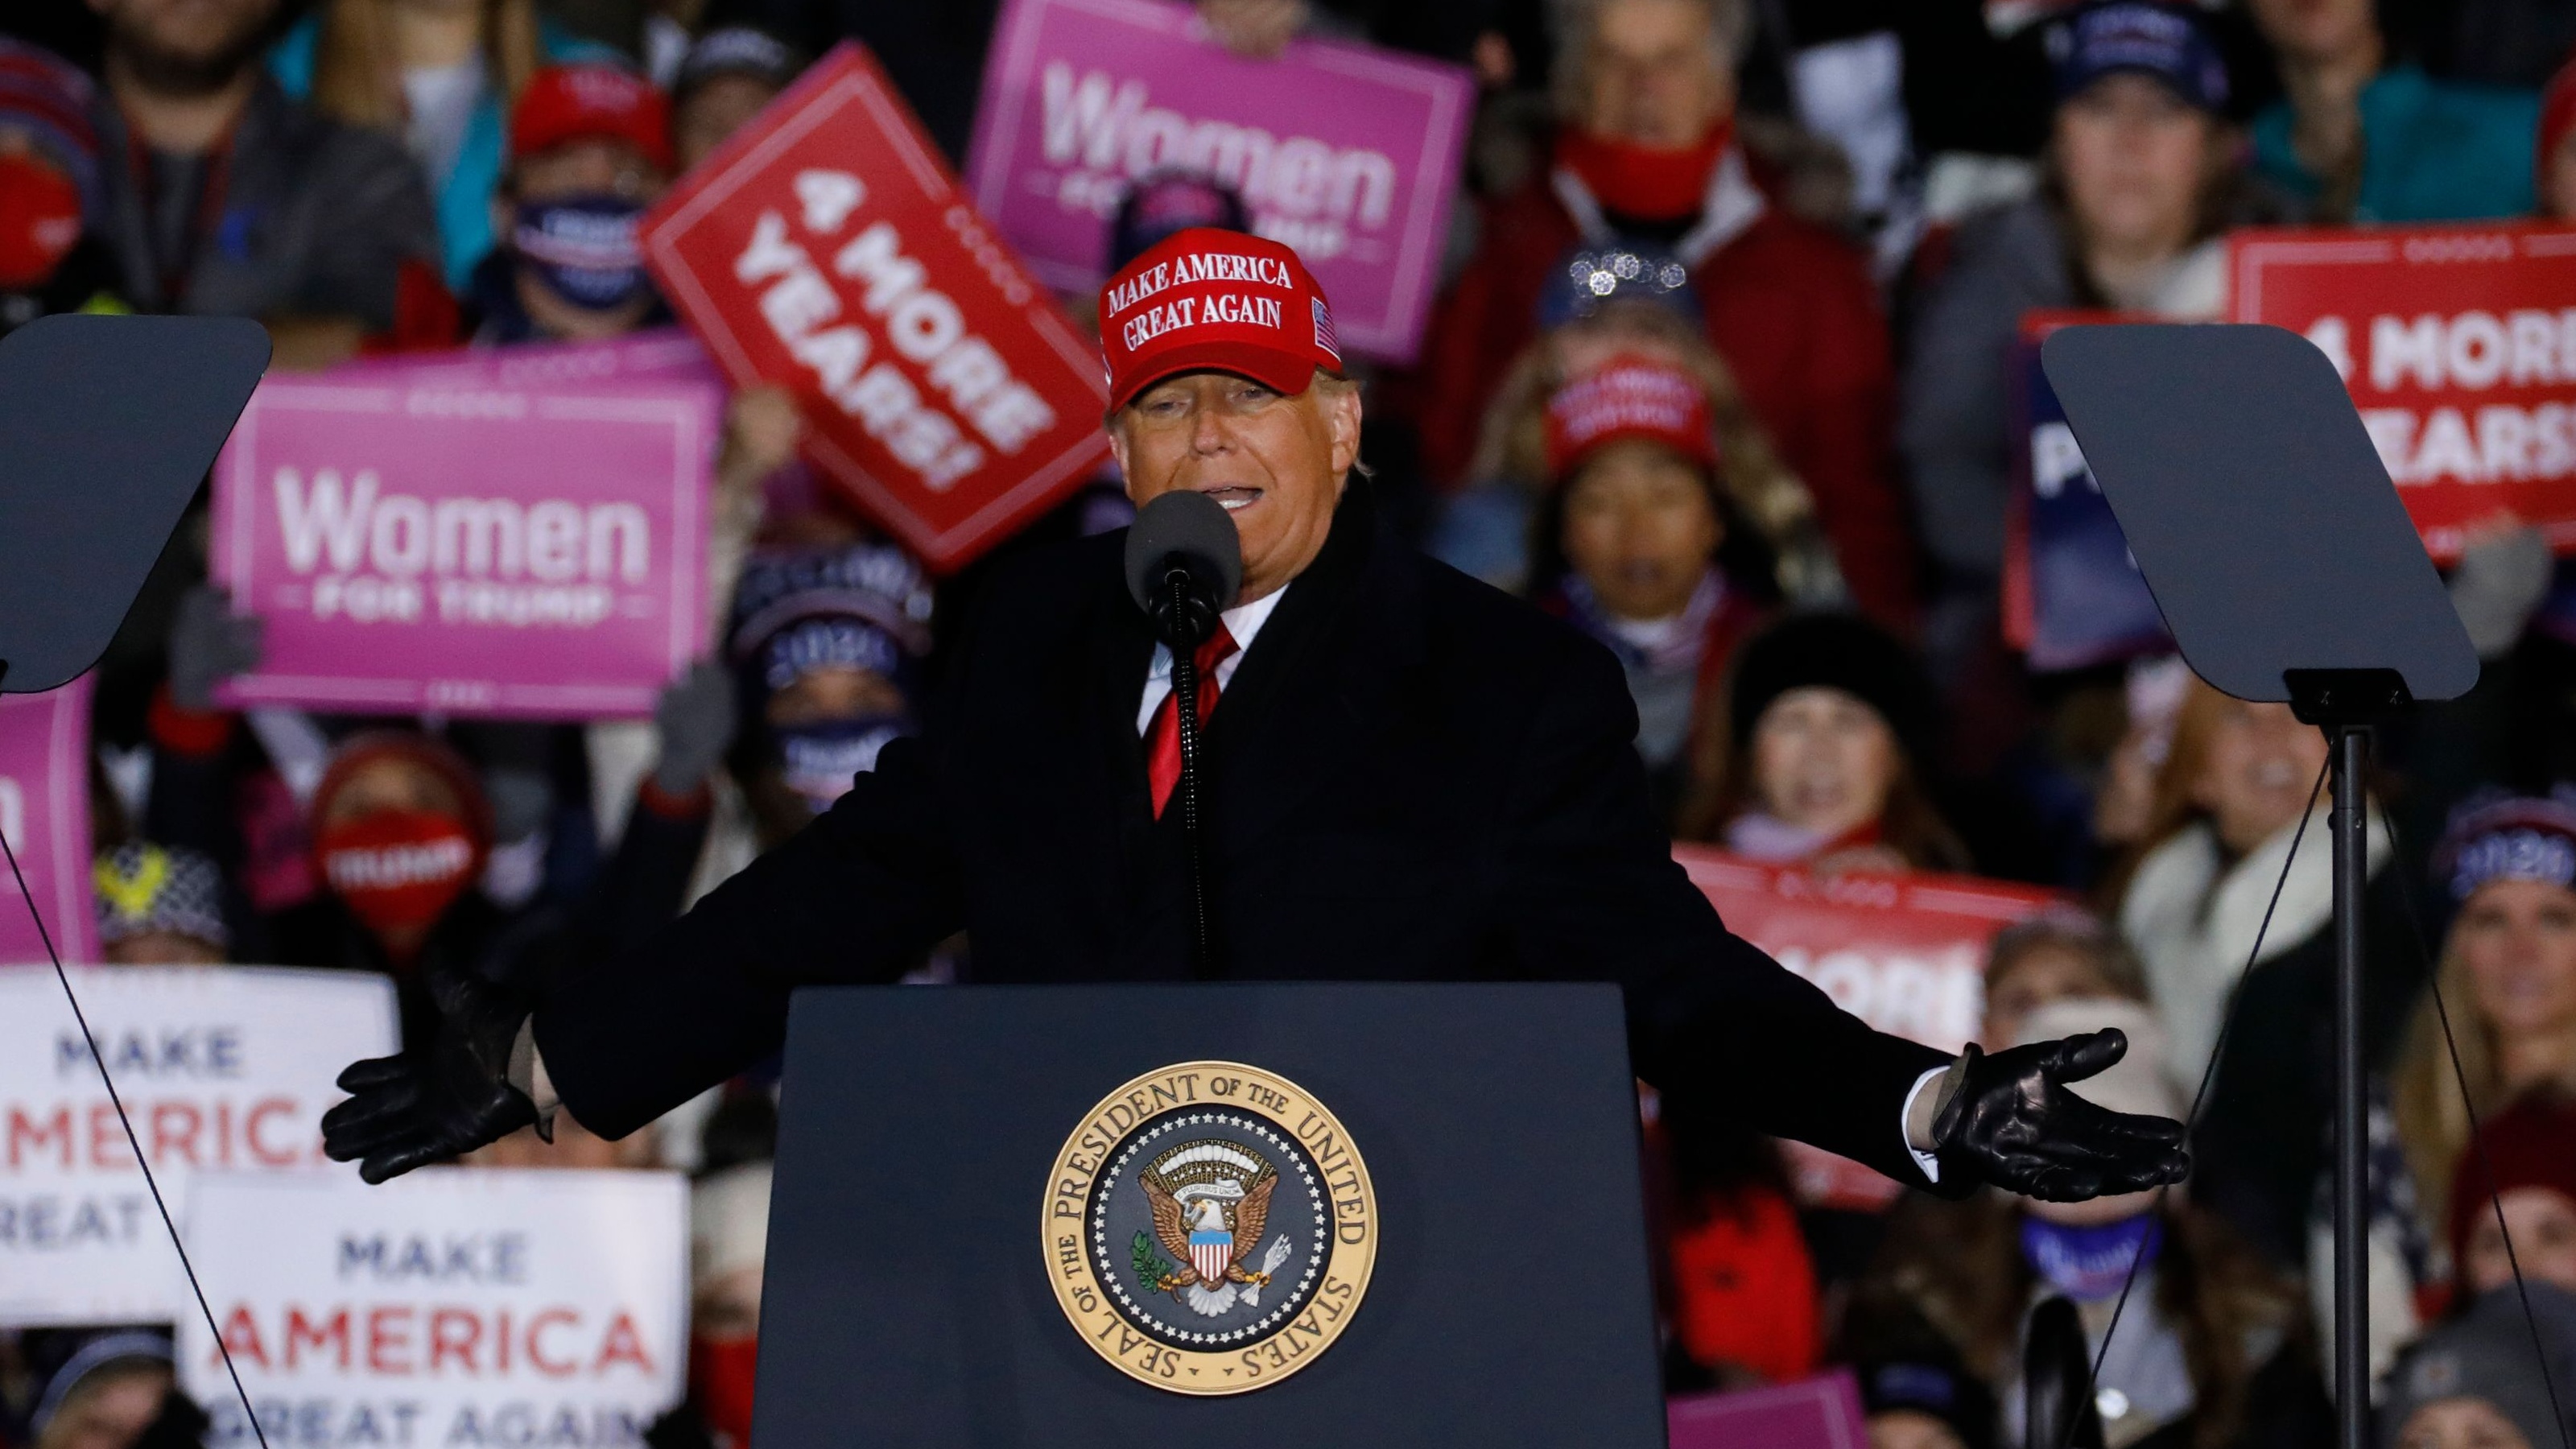 Donald Trump at his final rally before election day in the 2020 presidential election.